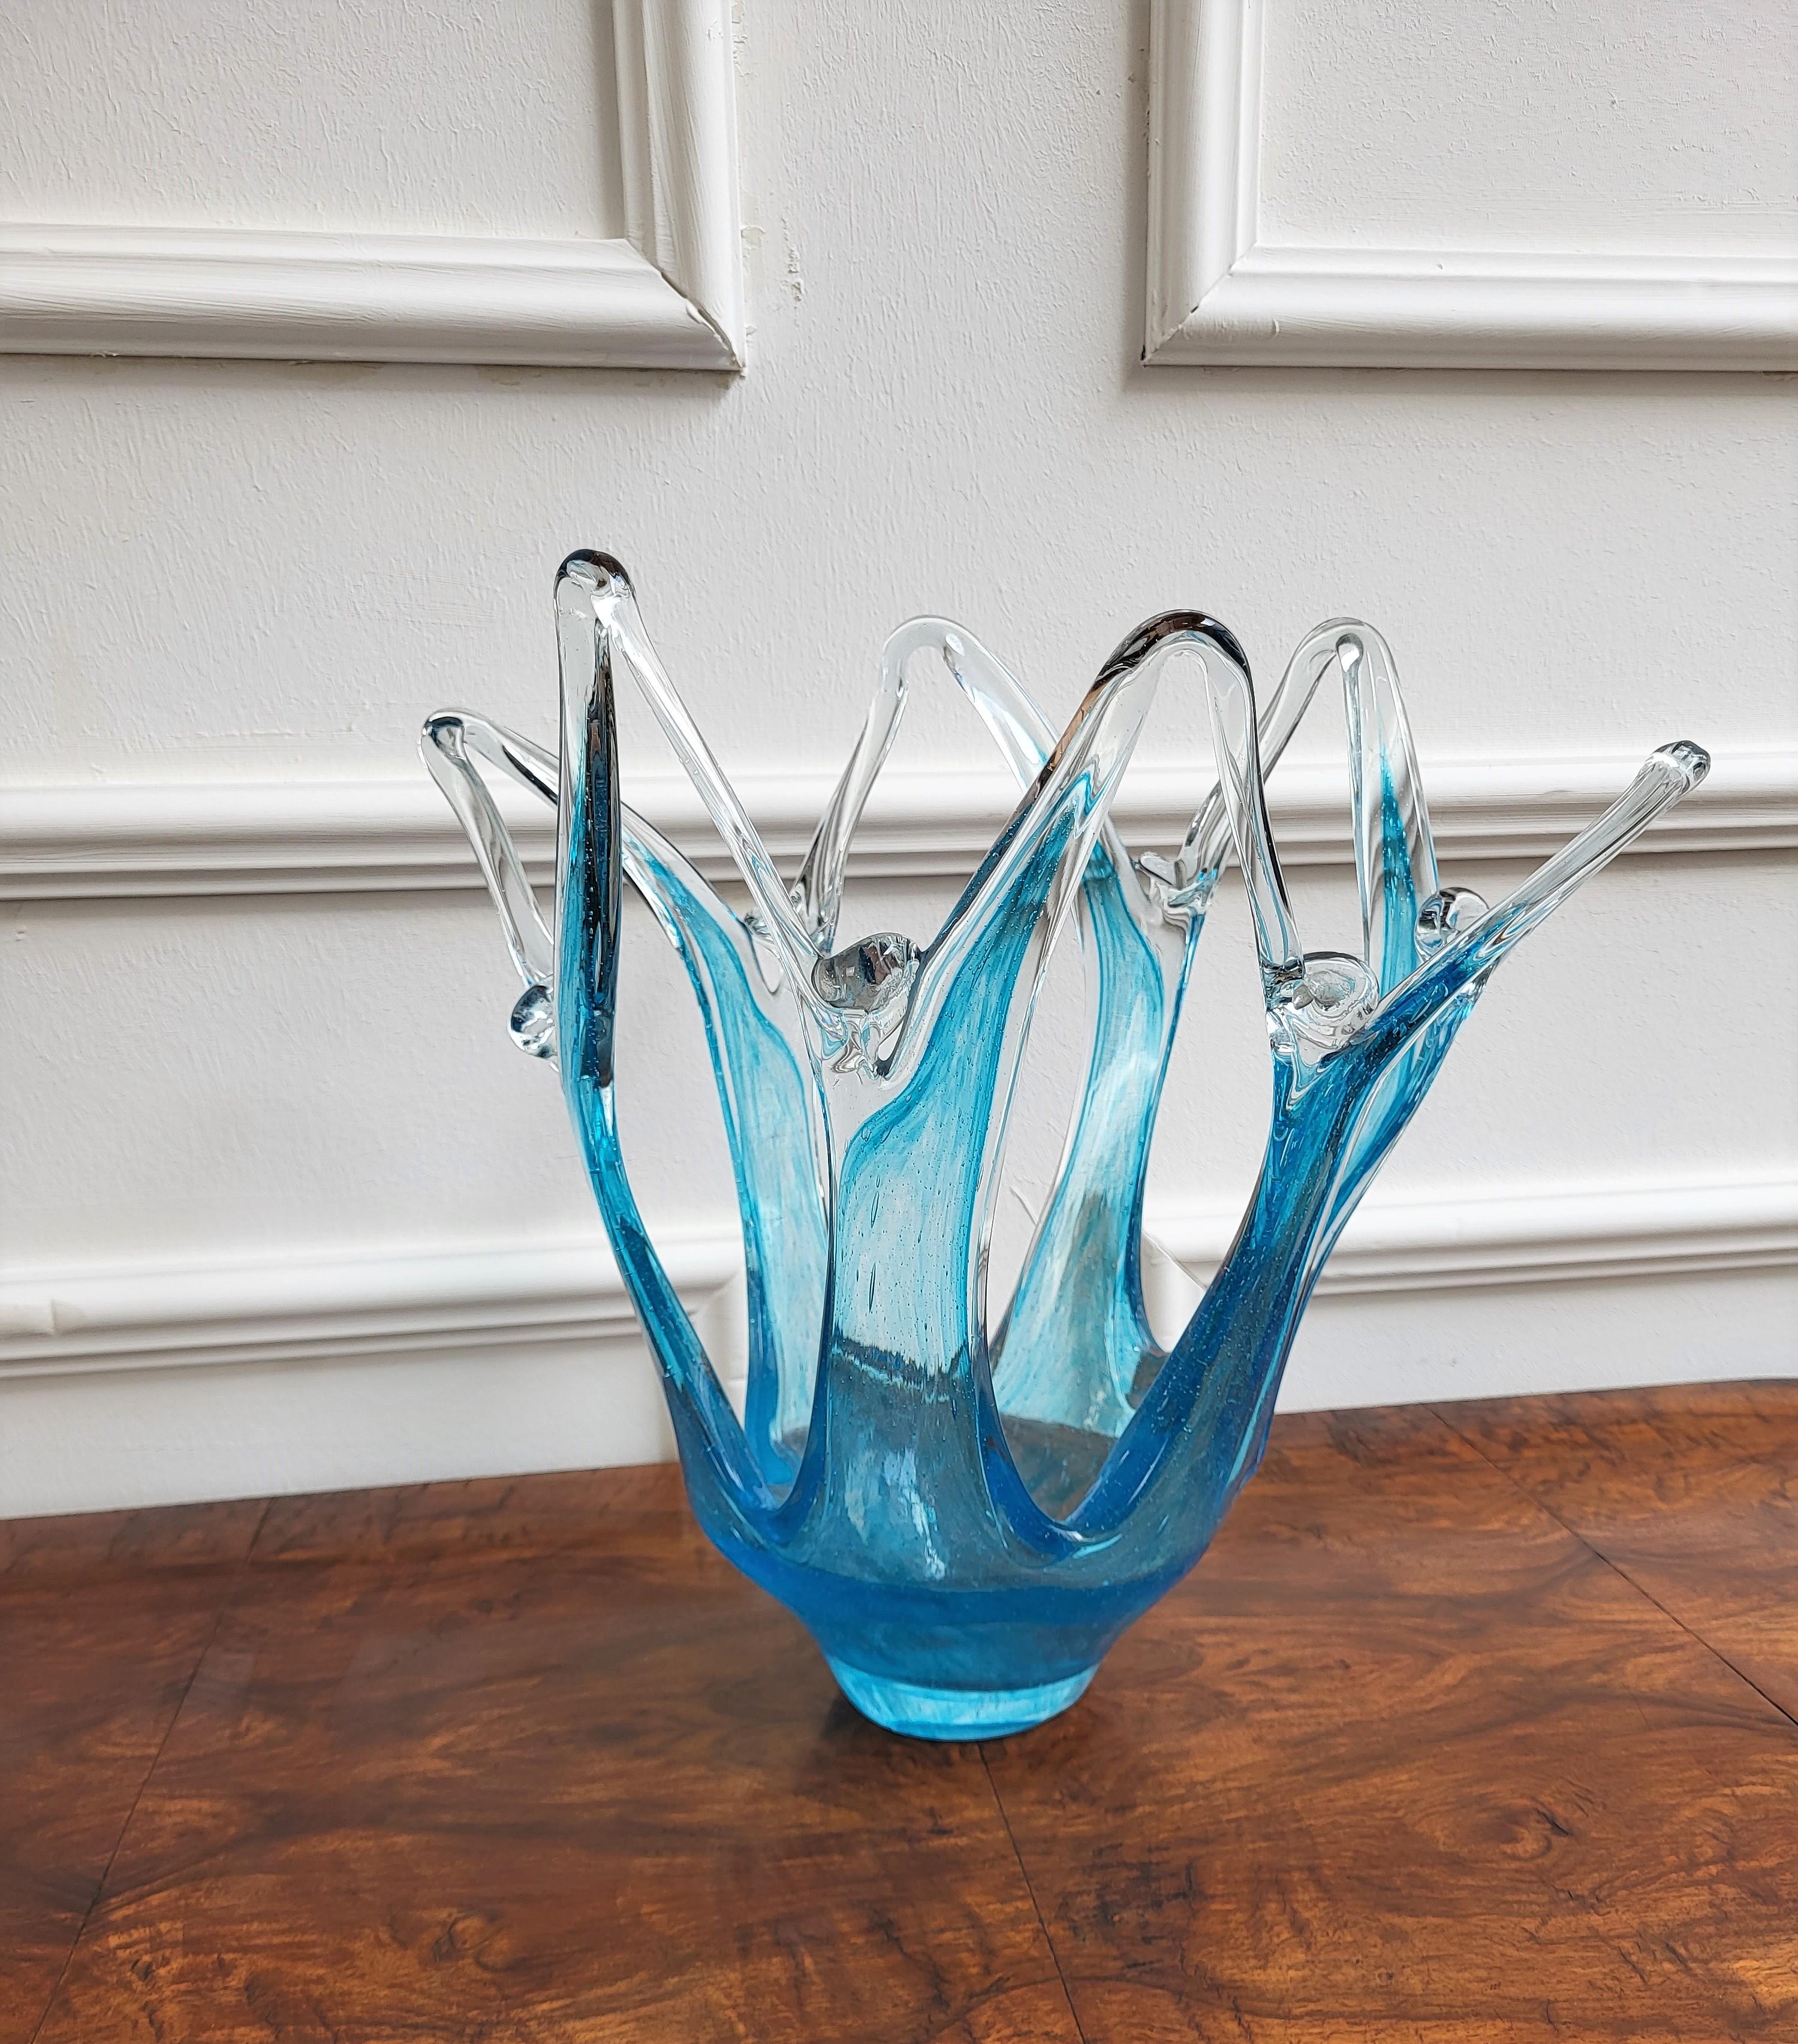 Beautiful ombre effect blue Murano glass vase from 1970s, Italy.